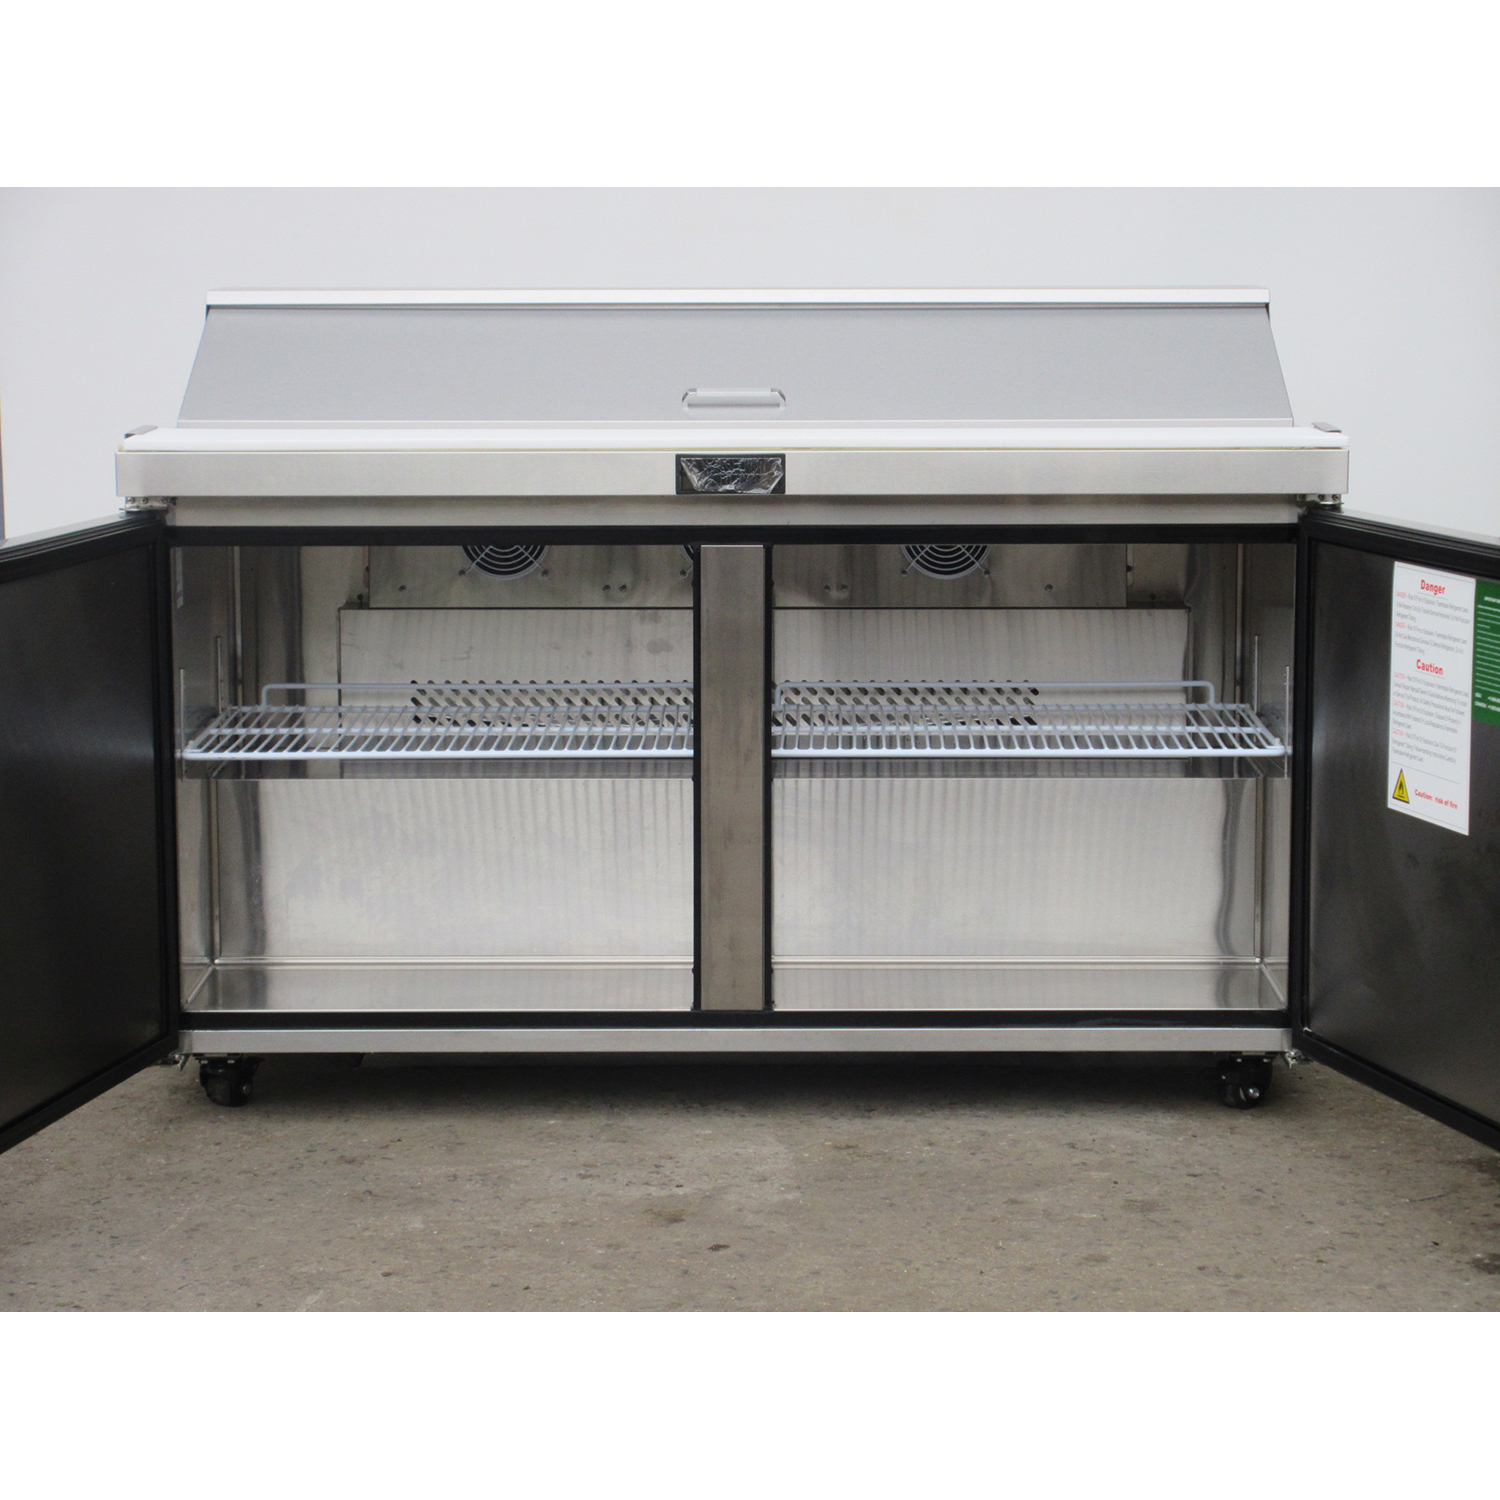 Atosa MSF8303GR Two Door Sandwich Prep Table 60-1/4"W, 17.2 Cu. Ft., Used Excellent Condition image 1